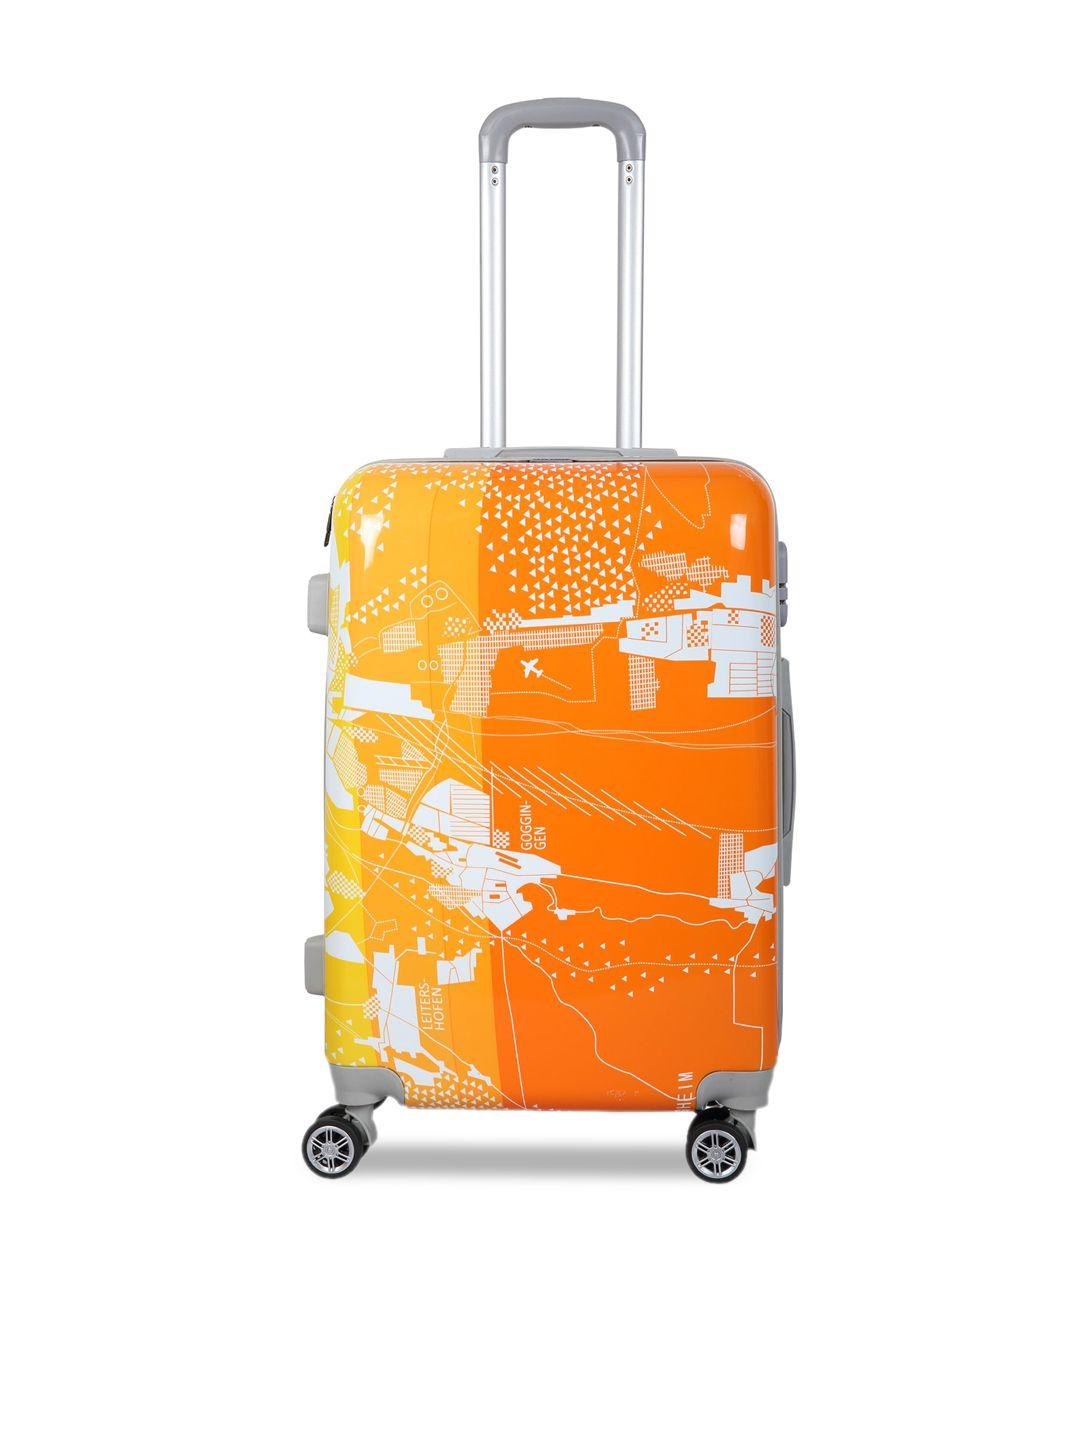 polo class orange & white printed hard sided cabin trolley suitcase